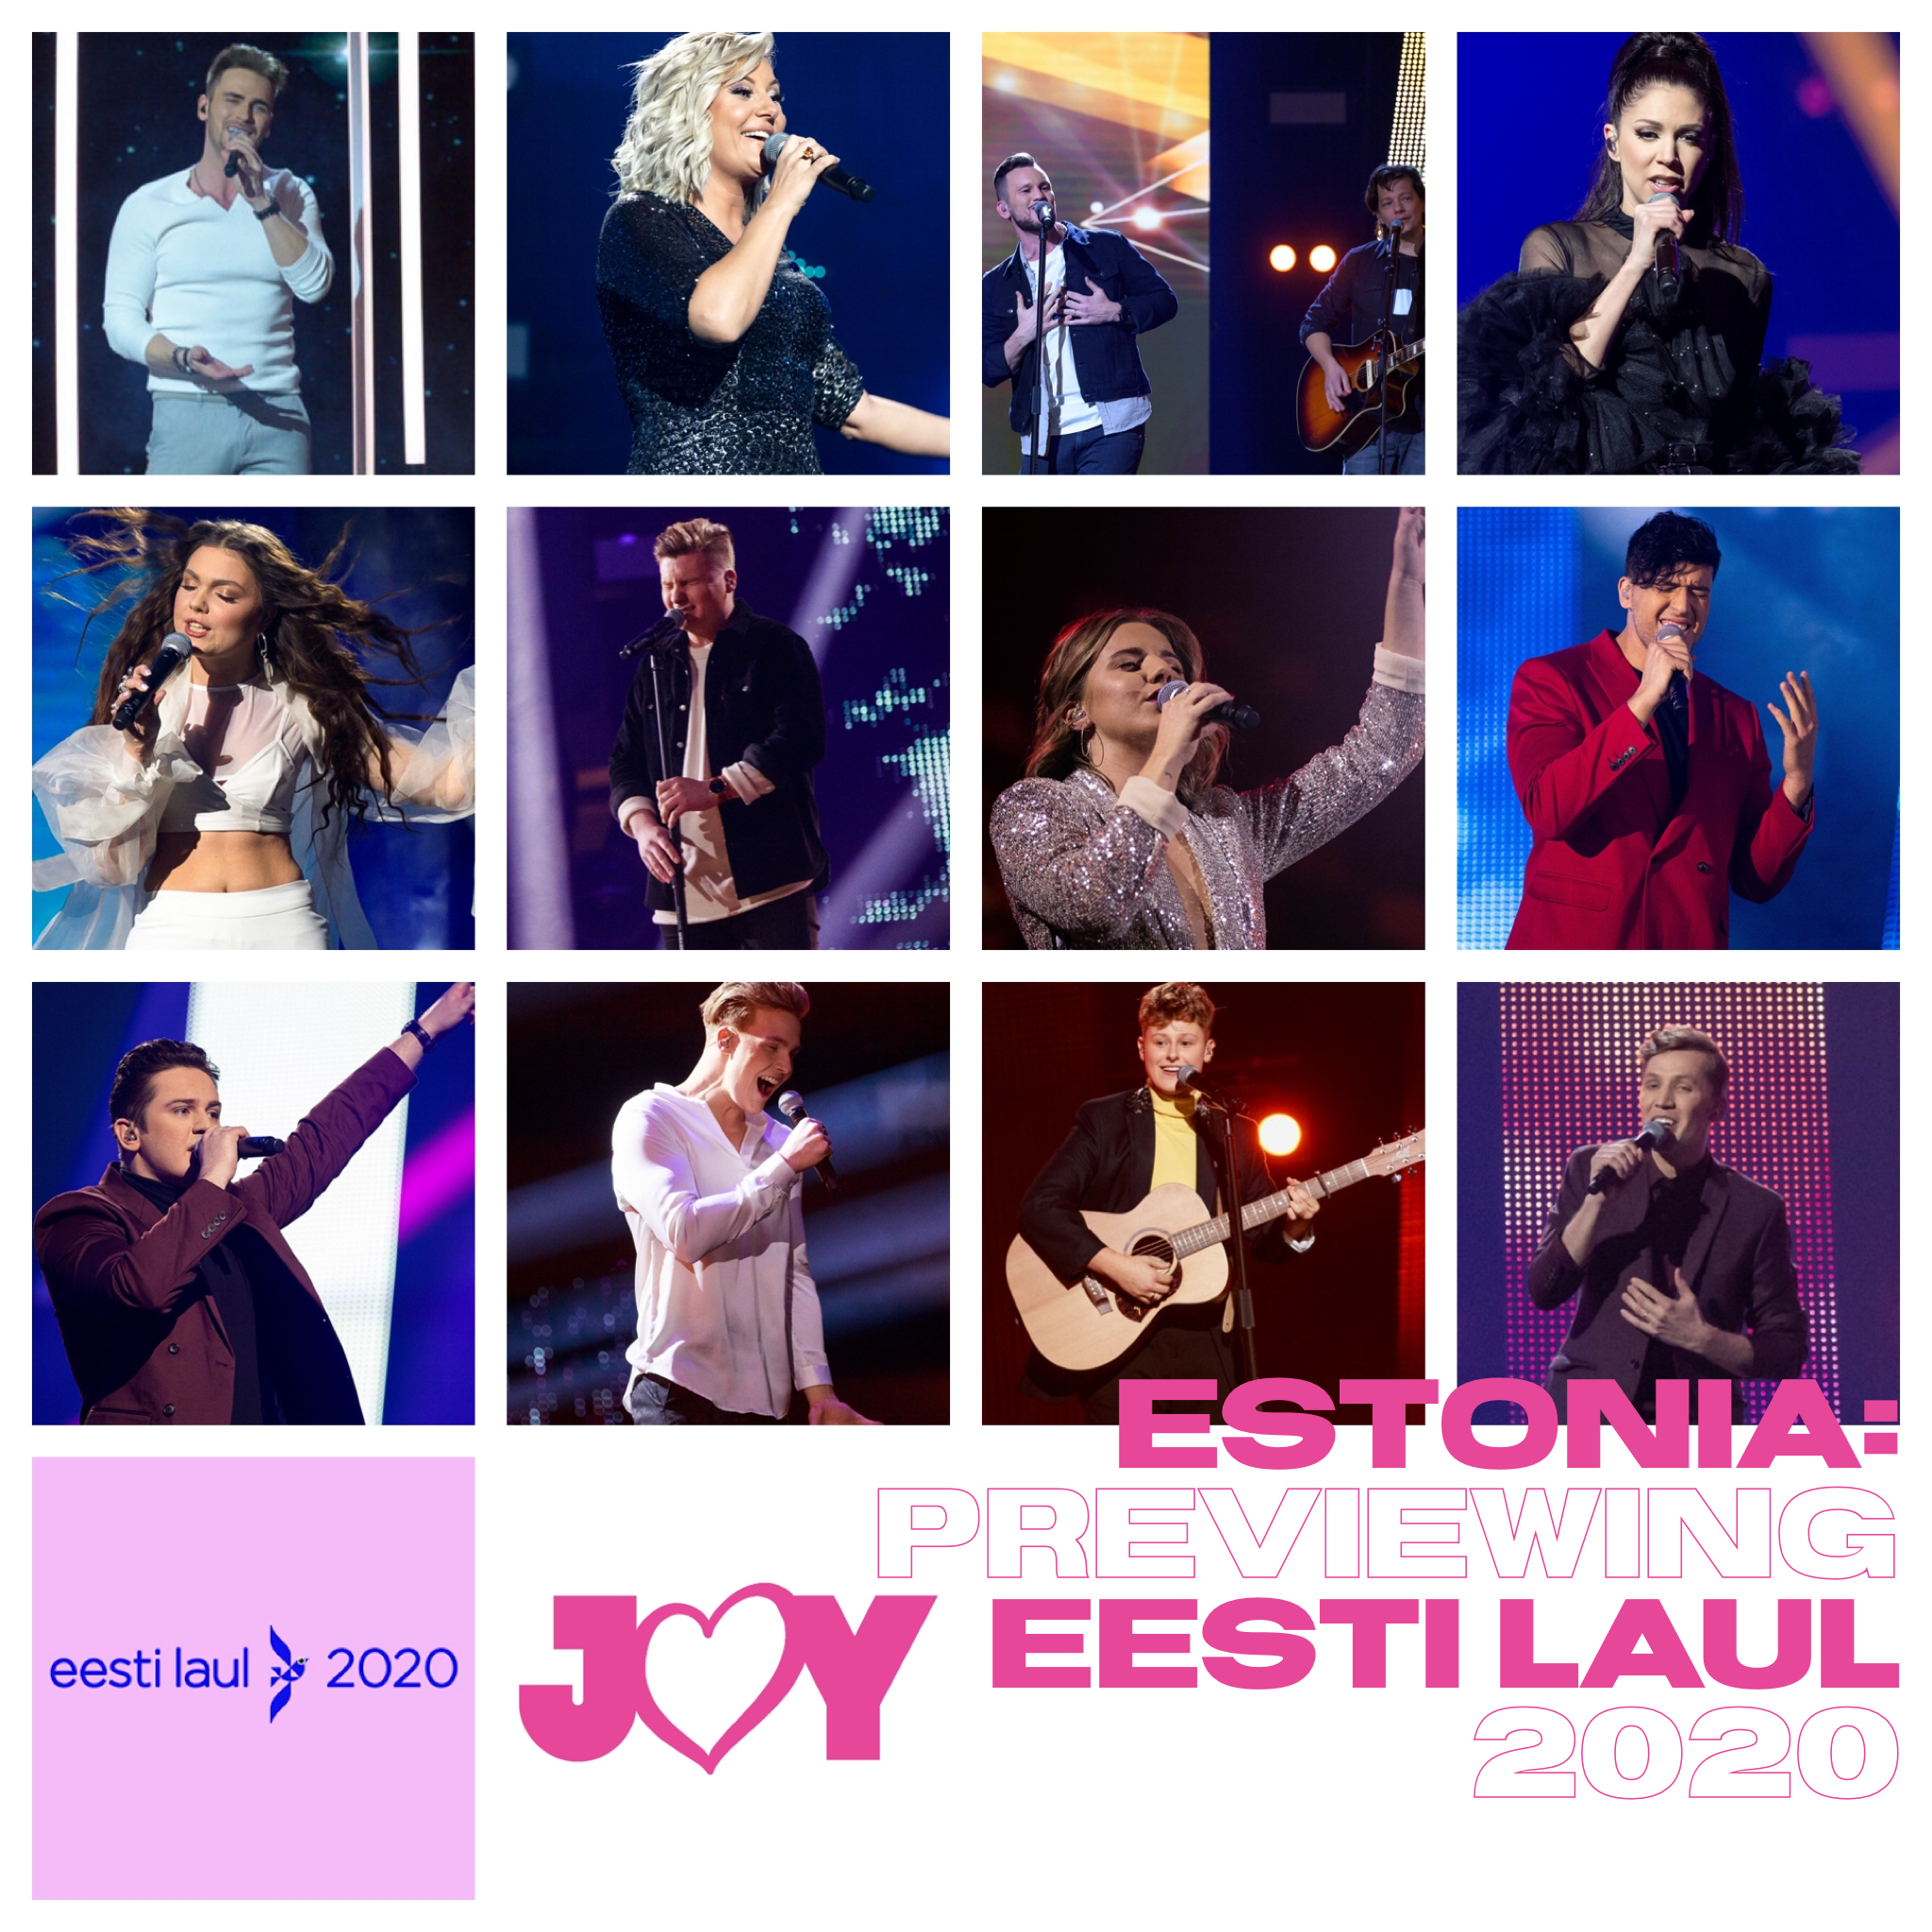 Estonia’s party time: Previewing Eesti Laul 2020